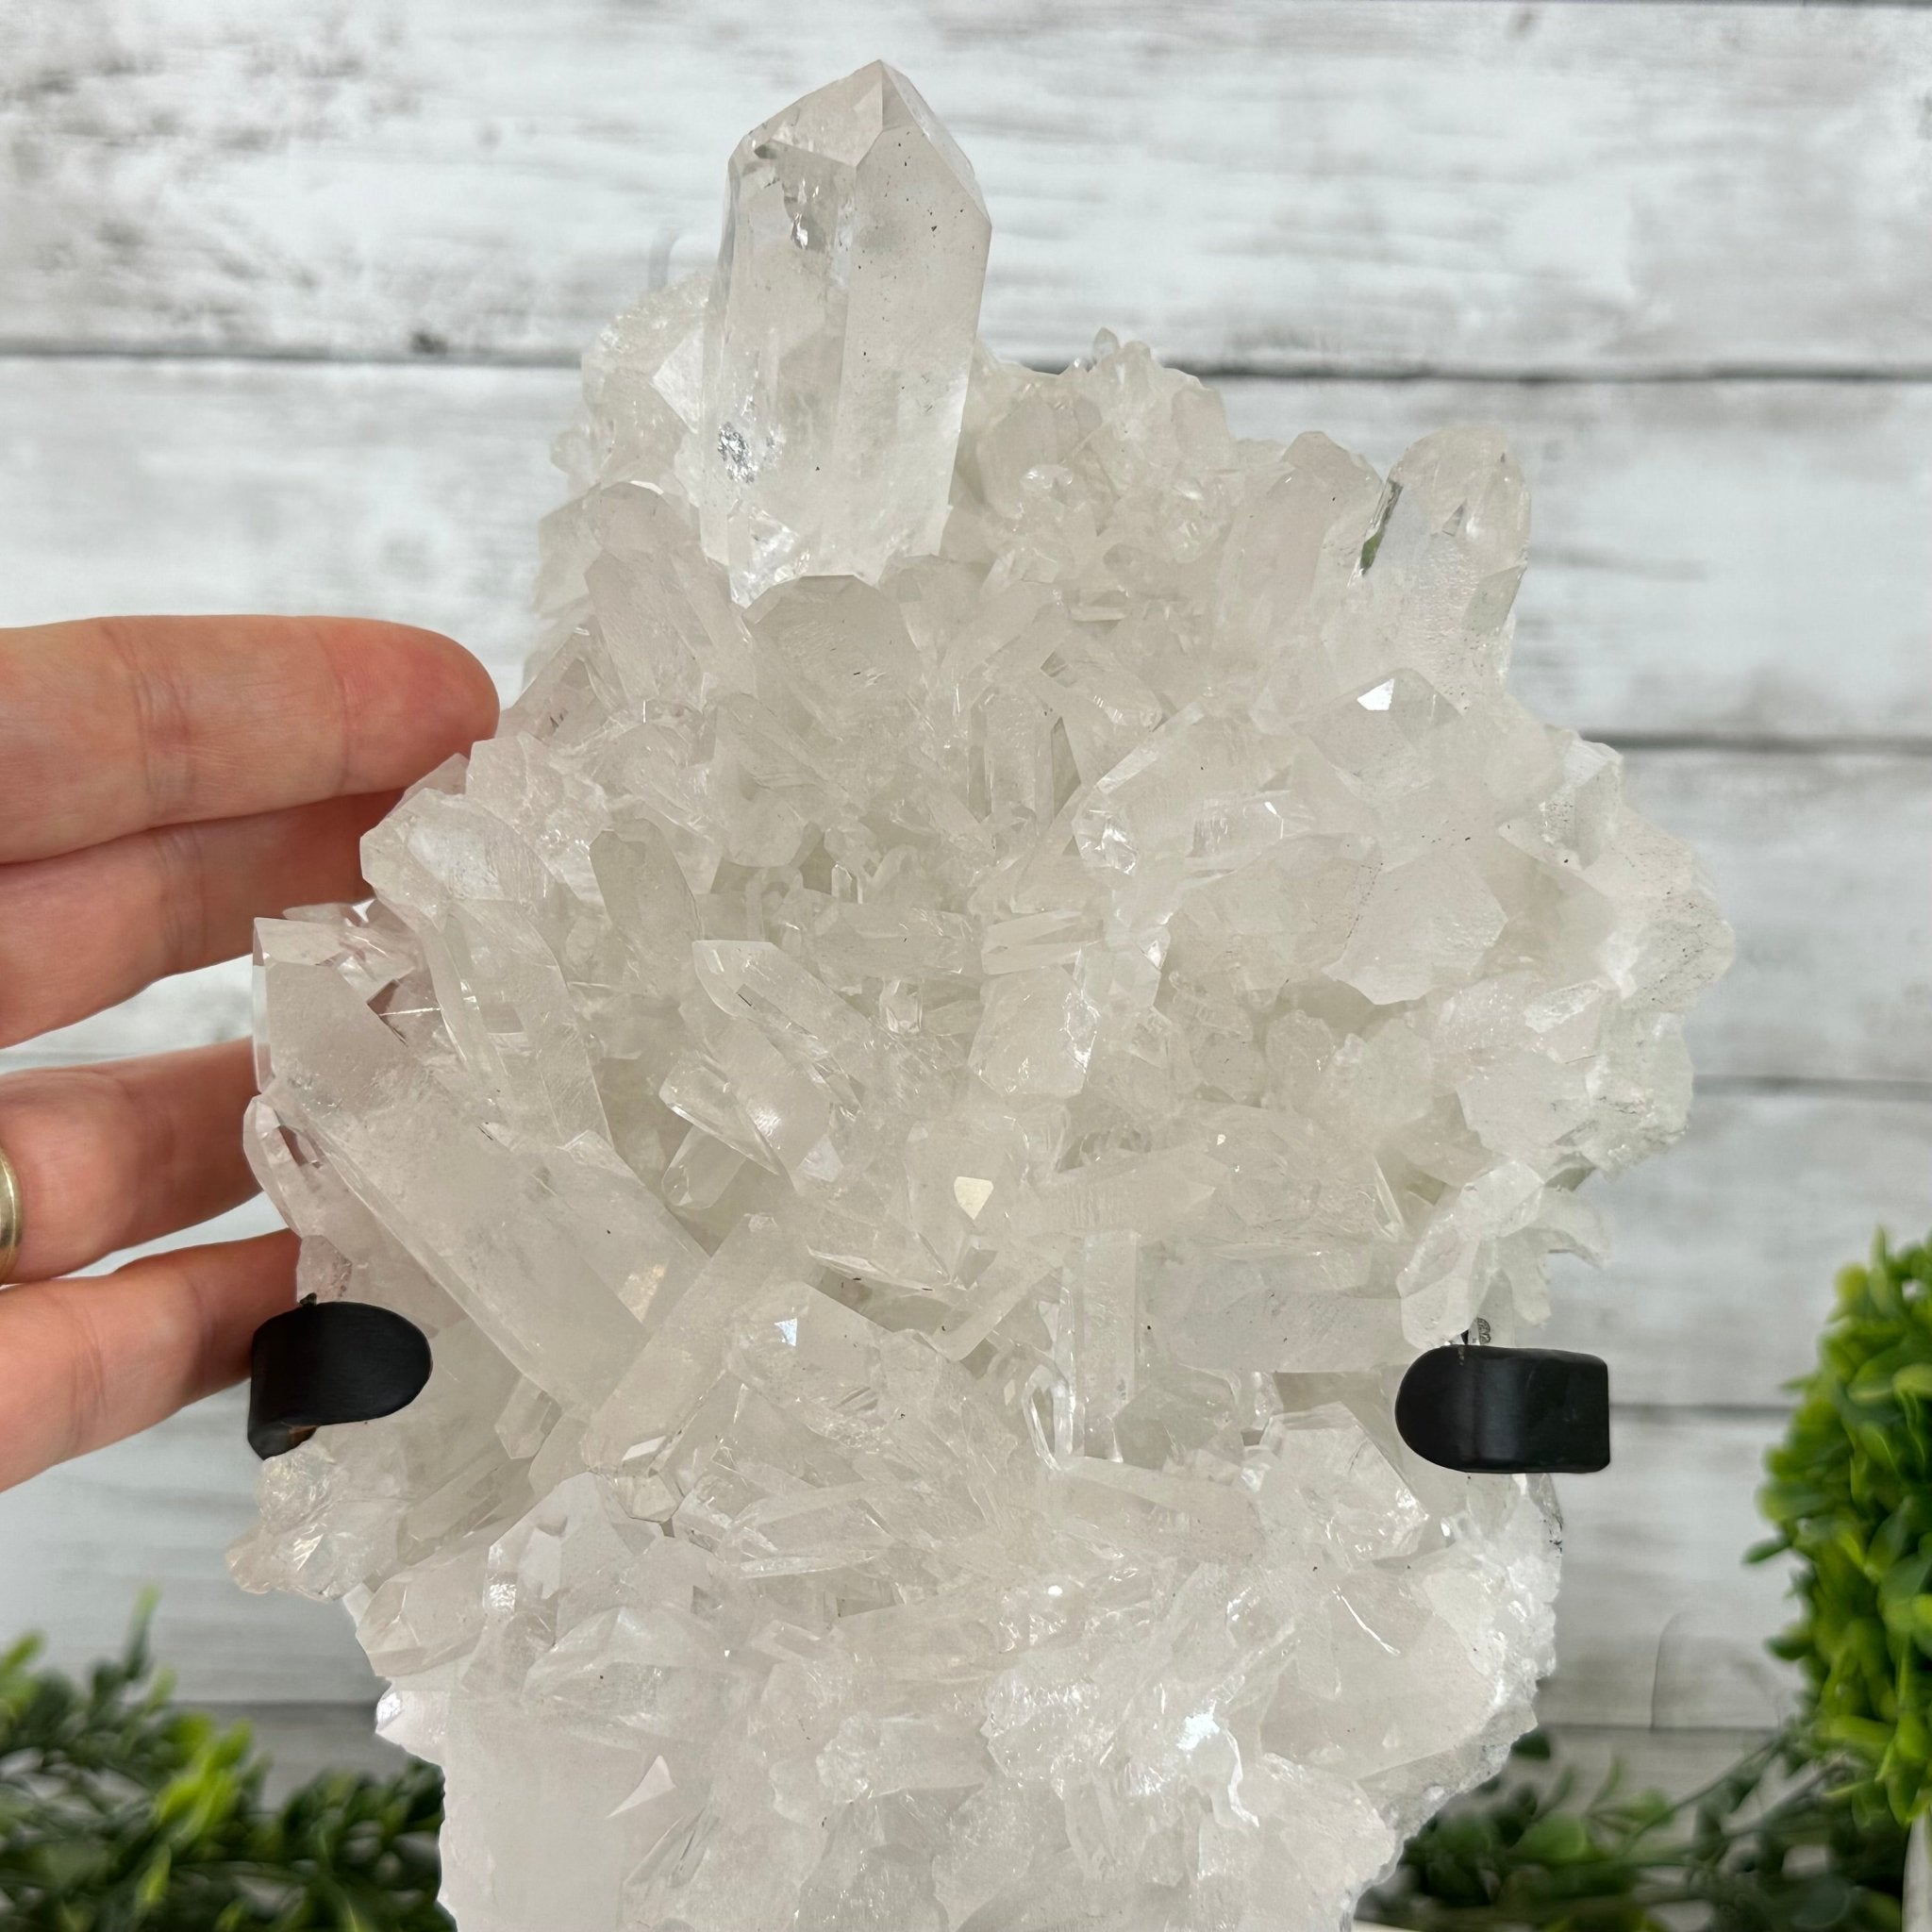 Super Quality Clear Quartz Crystal Cluster, metal base, 8.4 lbs & 11.1" Tall #5495-0077 by Brazil Gems® - Brazil GemsBrazil GemsSuper Quality Clear Quartz Crystal Cluster, metal base, 8.4 lbs & 11.1" Tall #5495-0077 by Brazil Gems®Clusters on Fixed Bases5495-0077